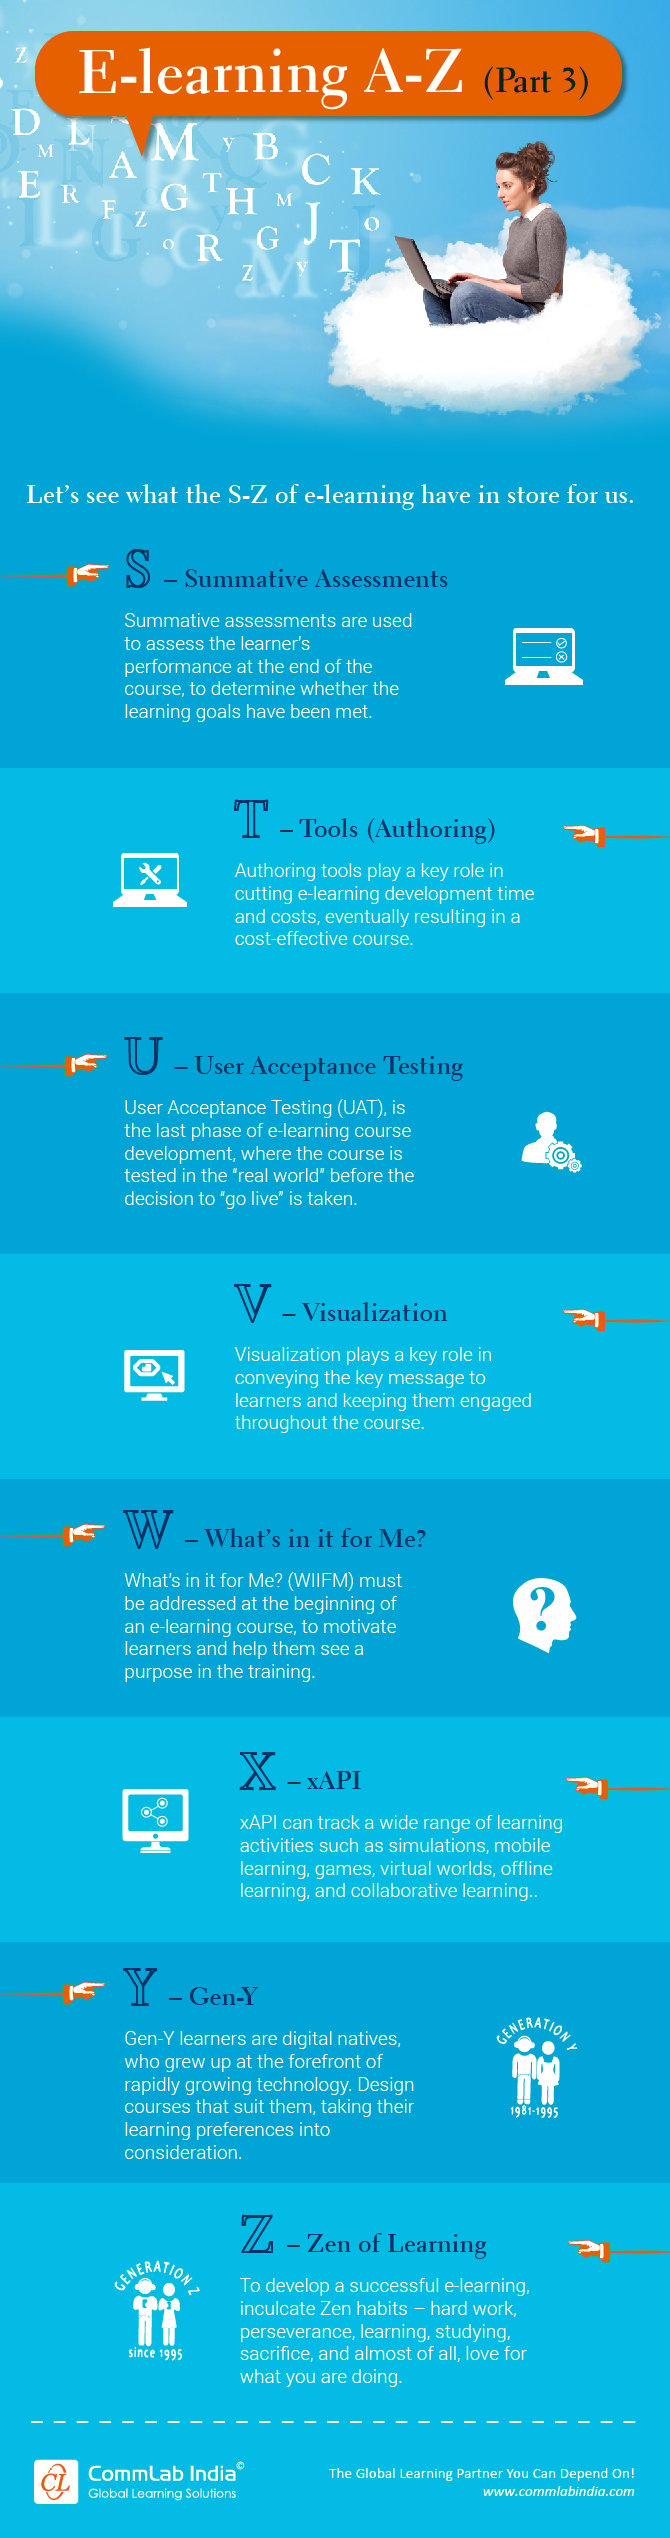 E-learning A-Z Terms: Part 3 [Infographic]